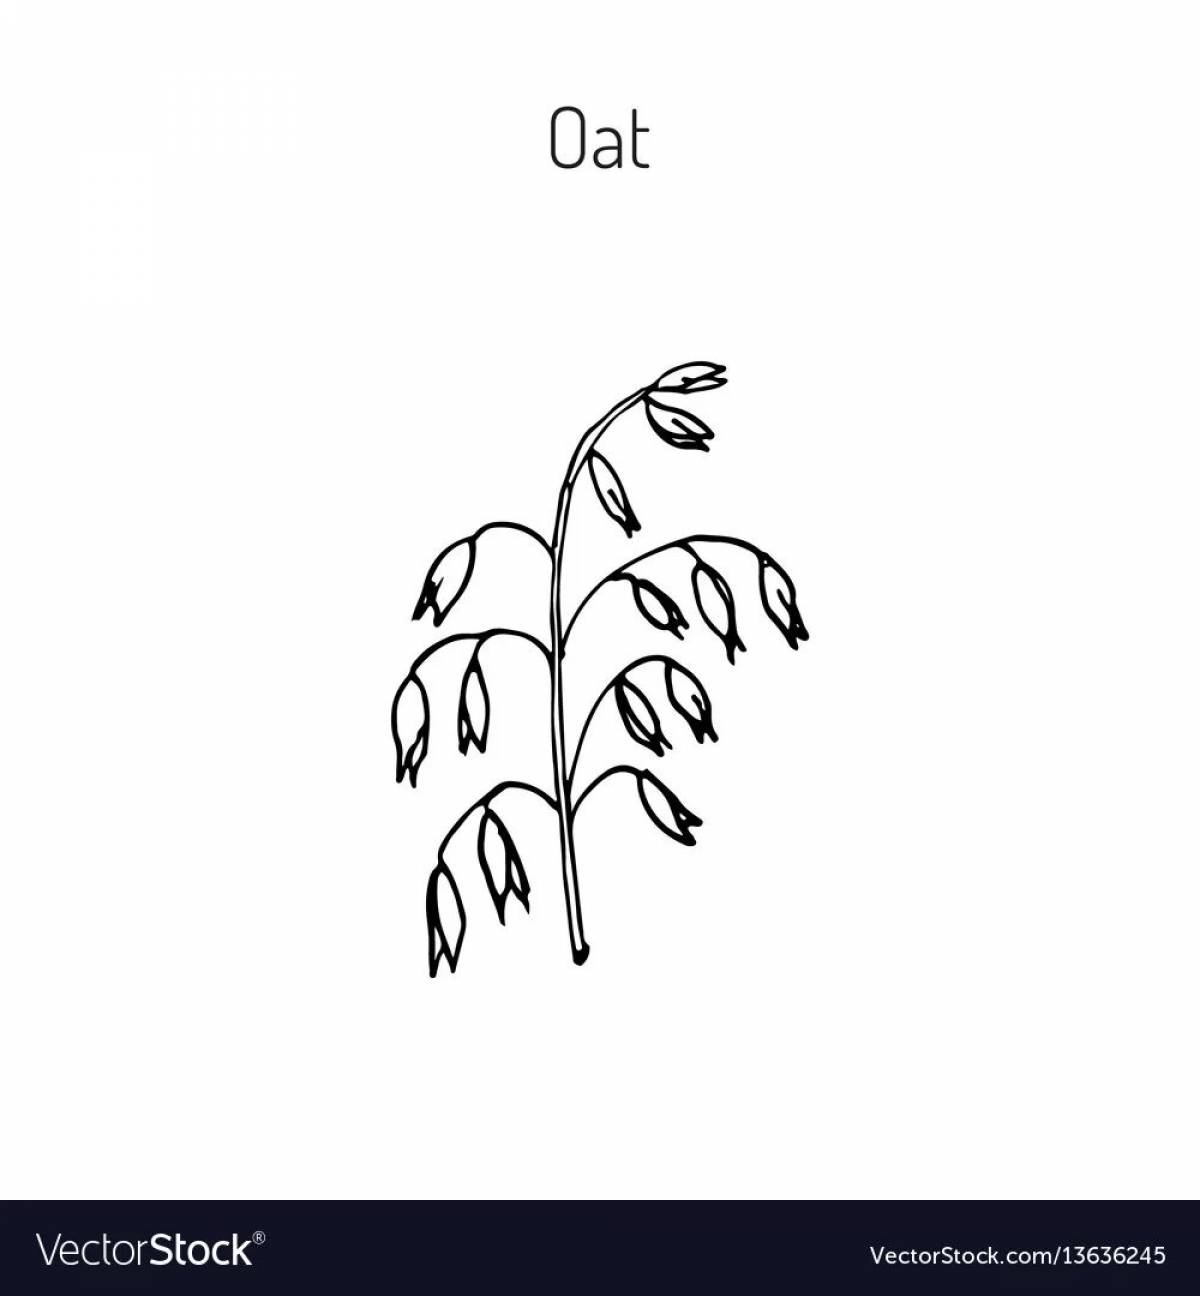 Stimulating coloring book of oats for children